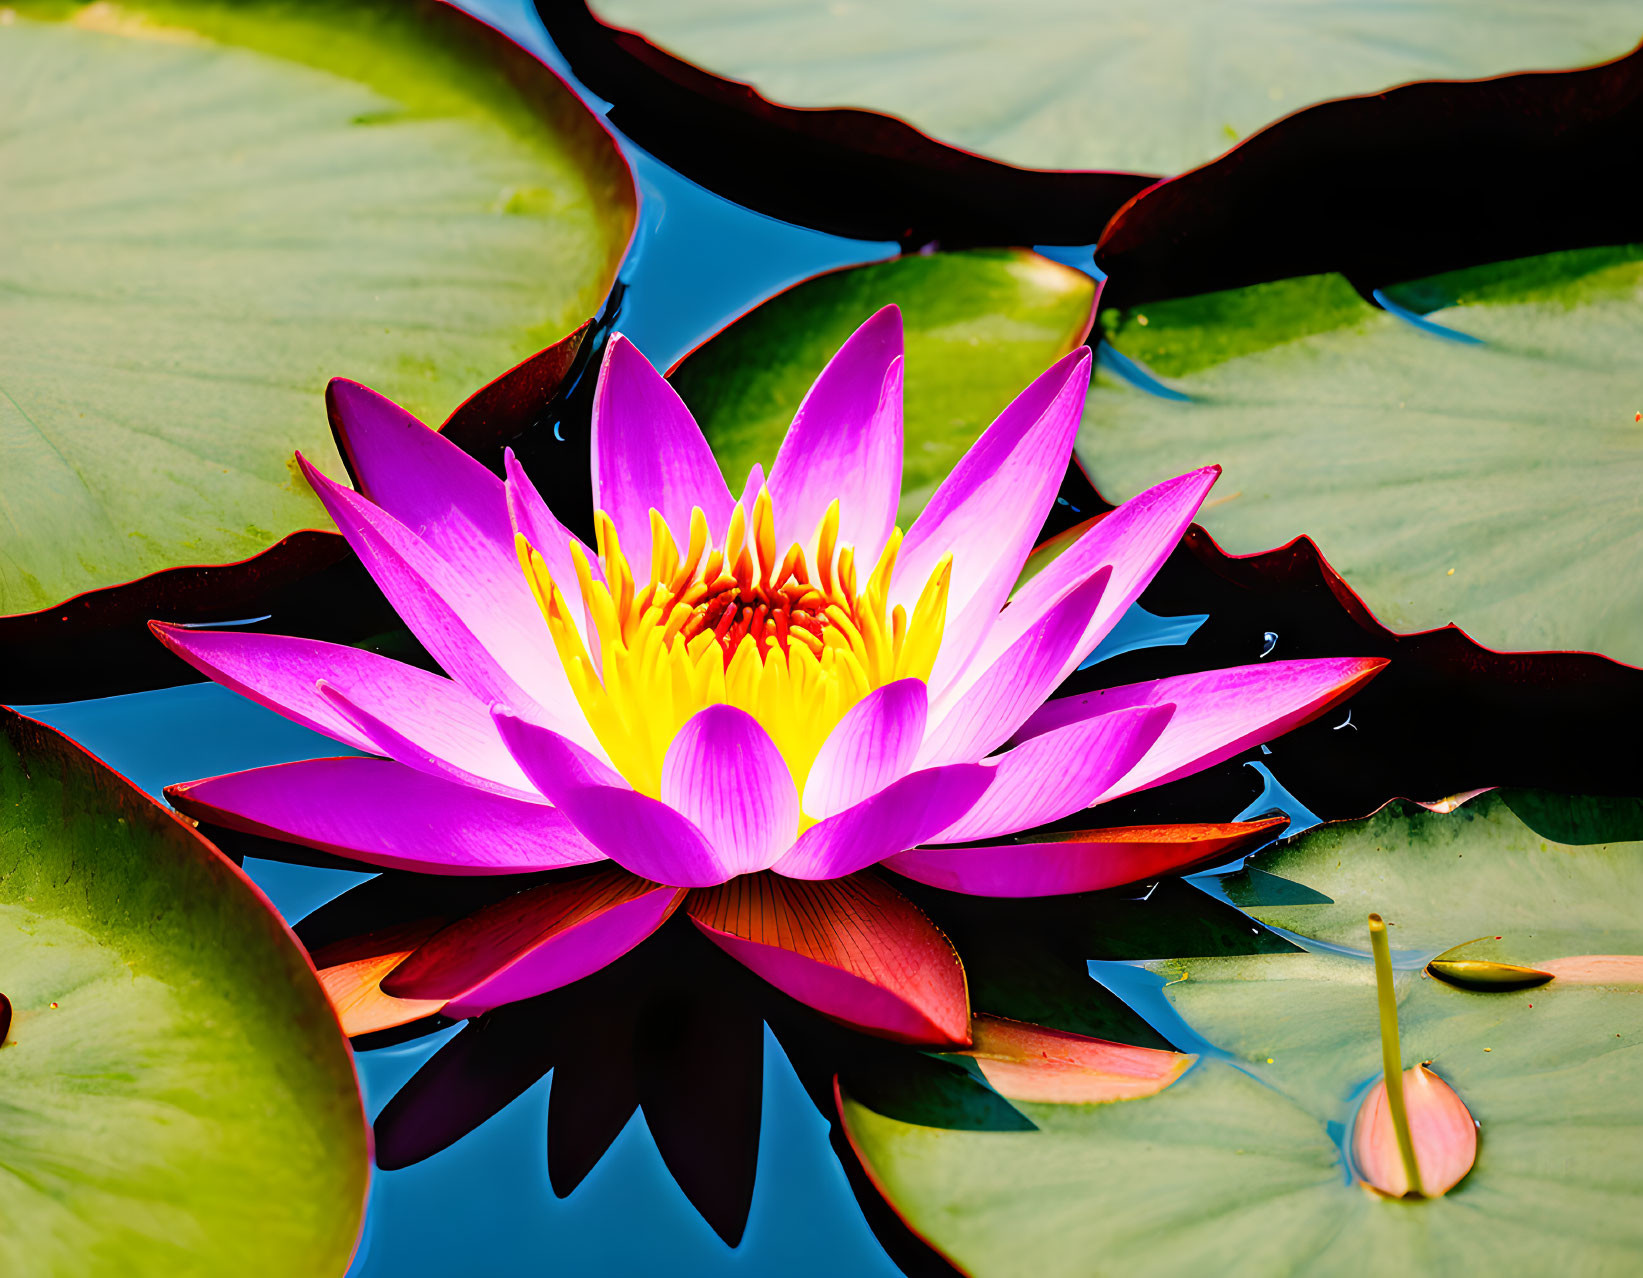 Waterlily on Pond